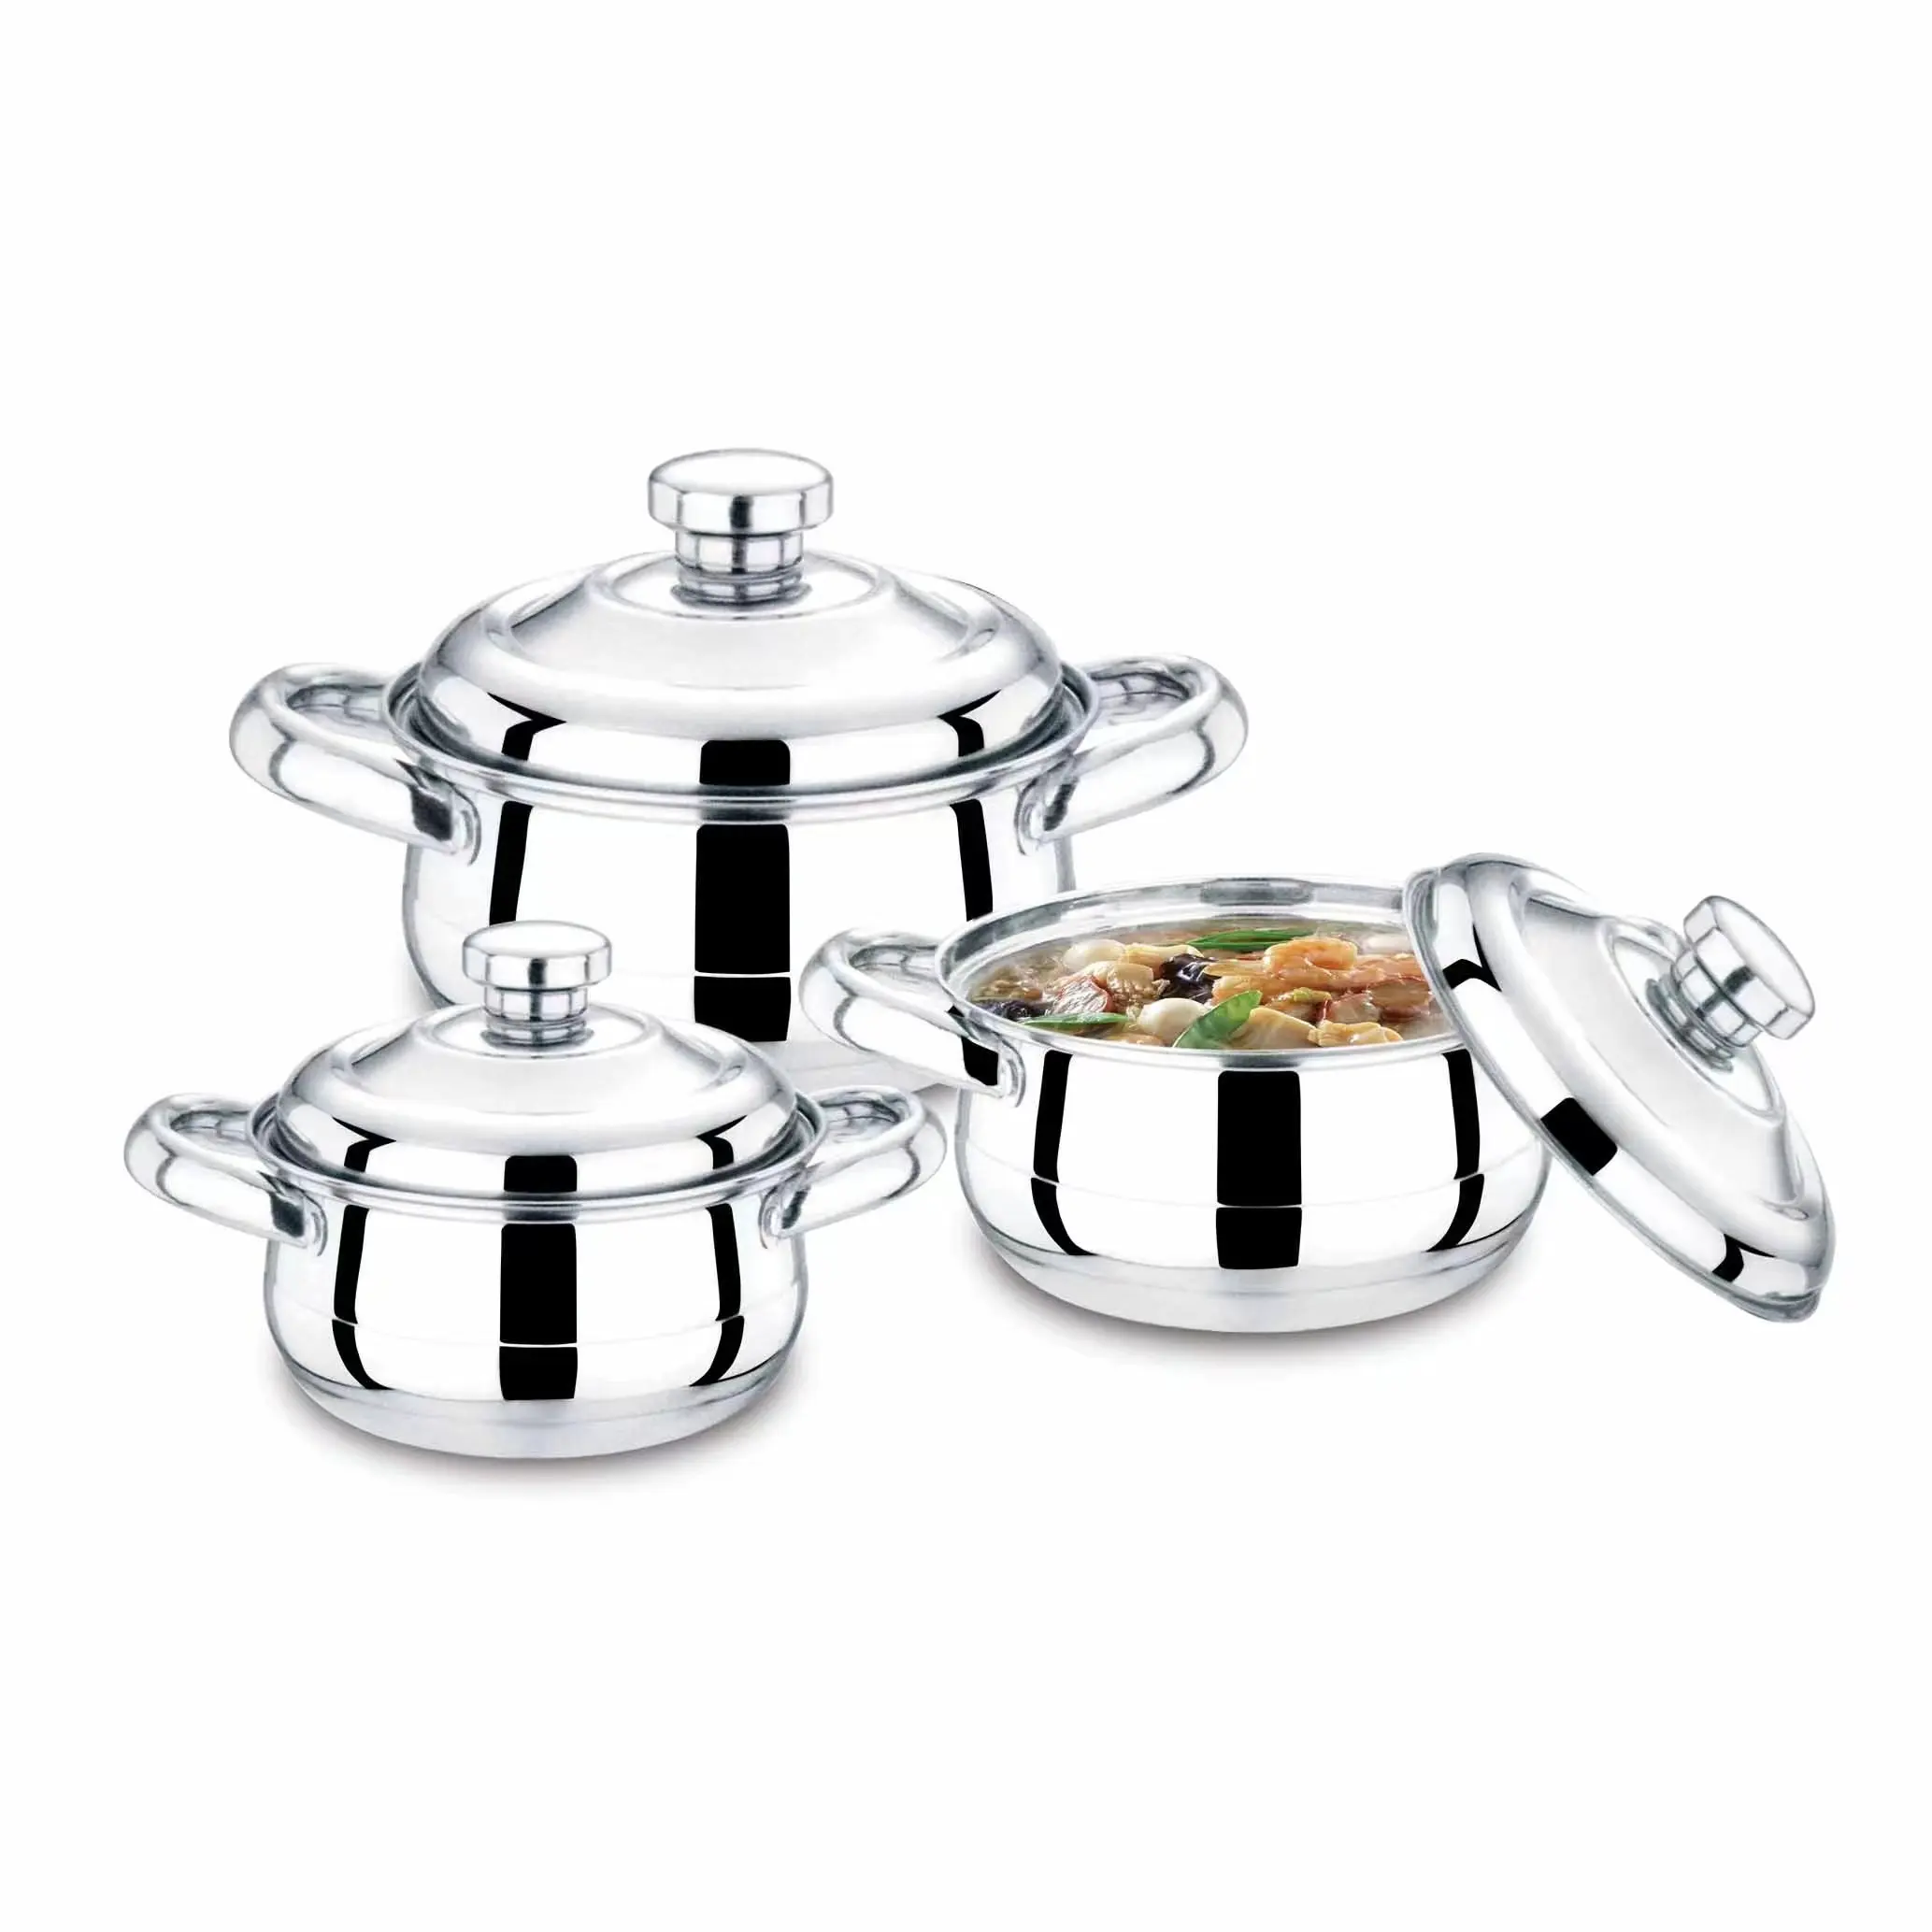 Hot sale 12pcs stainless steel induction cookware set with glass lid